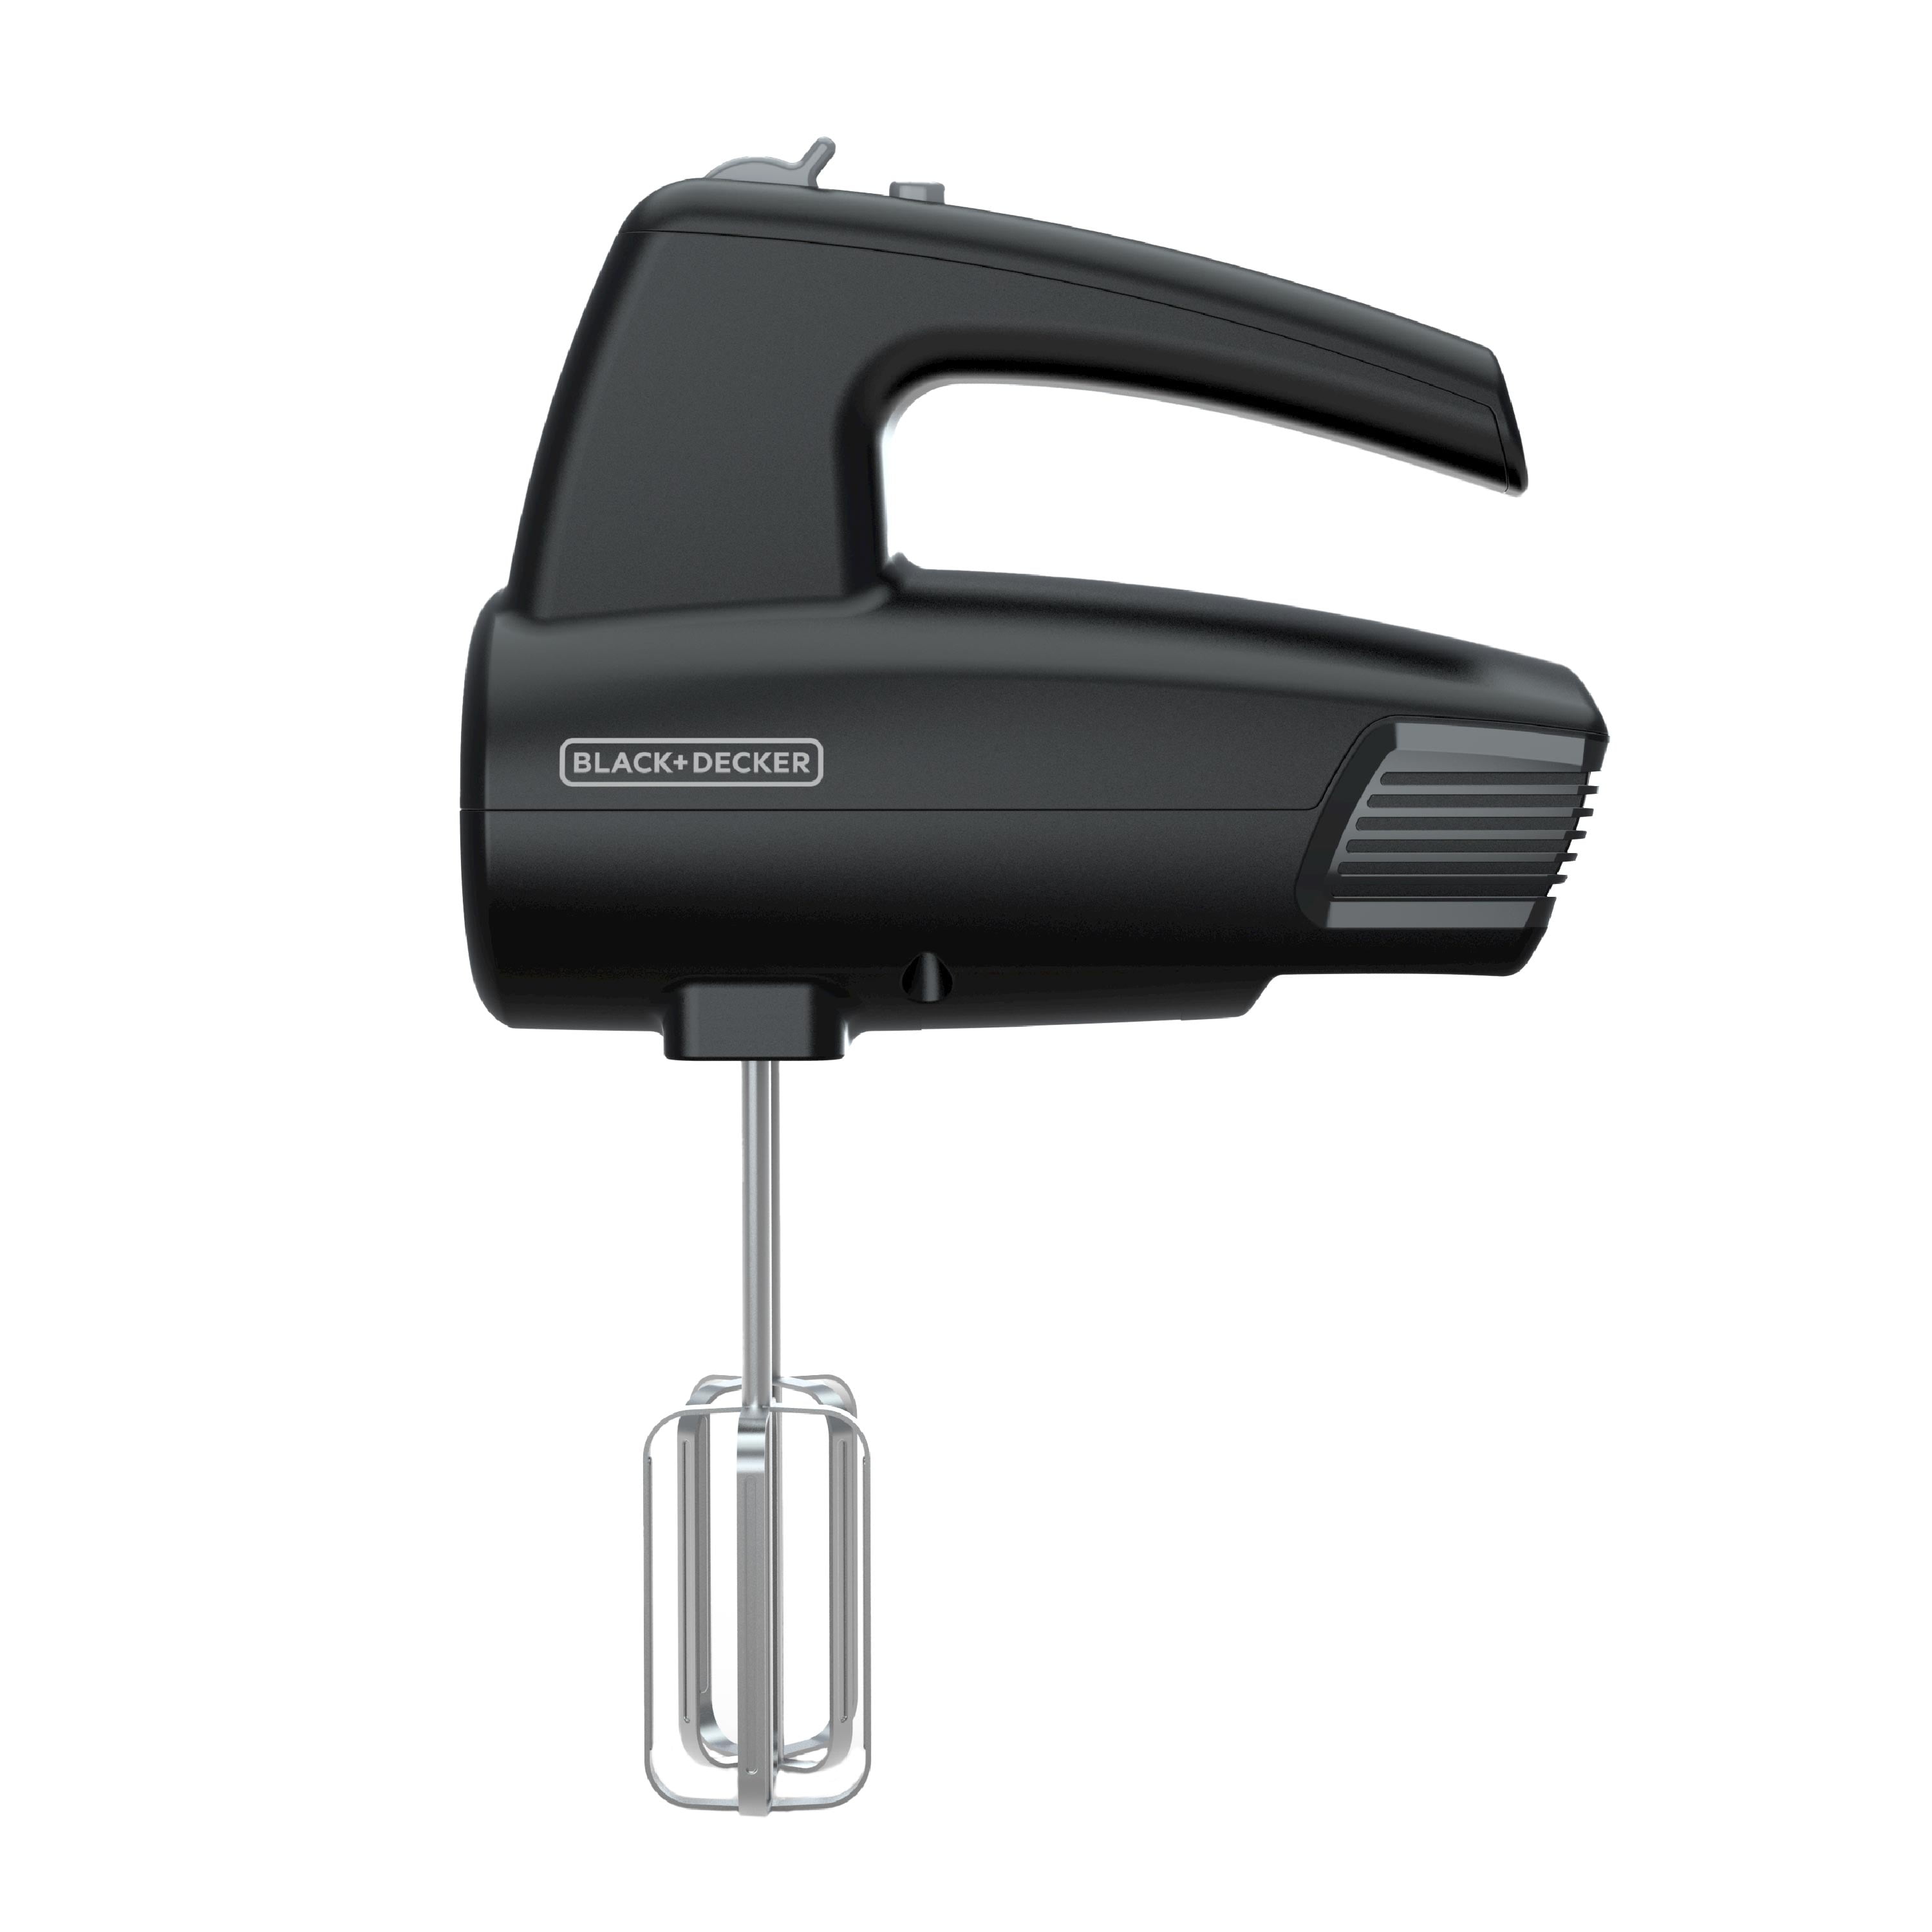 BLACK+DECKER 5-Speed Versatile Hand Mixer with 5 Attachments & Storage  Case, with Turbo Boost Button, Easy Eject Feature, Black